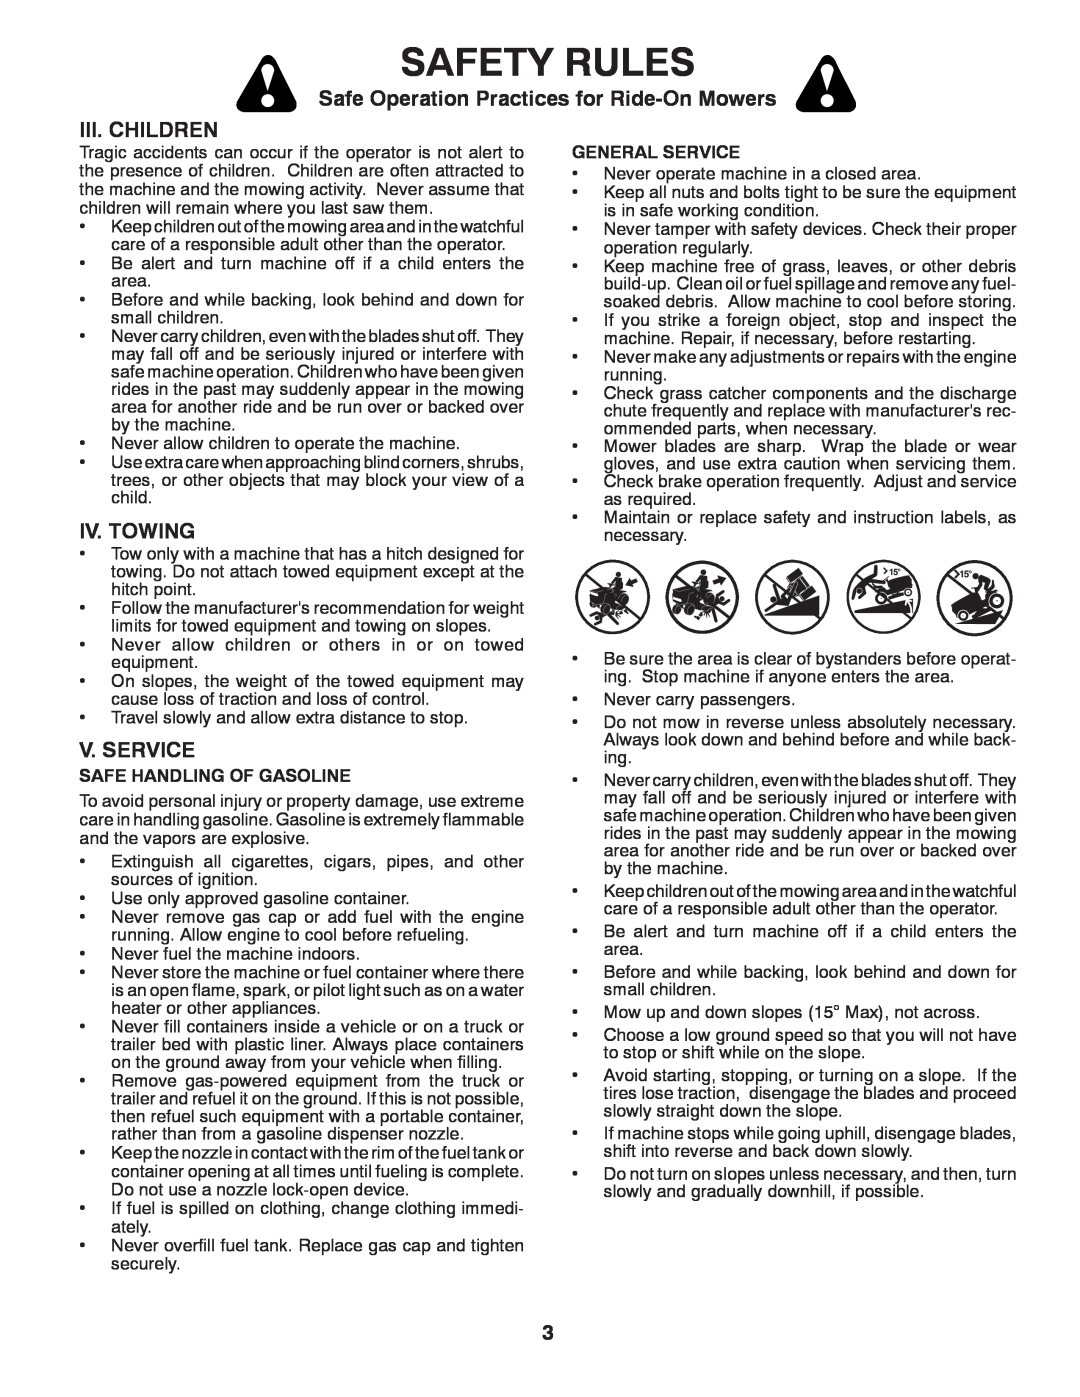 Ariens 935335 42 manual Safety Rules, Safe Operation Practices for Ride-OnMowers, Iii. Children, Iv. Towing, V. Service 